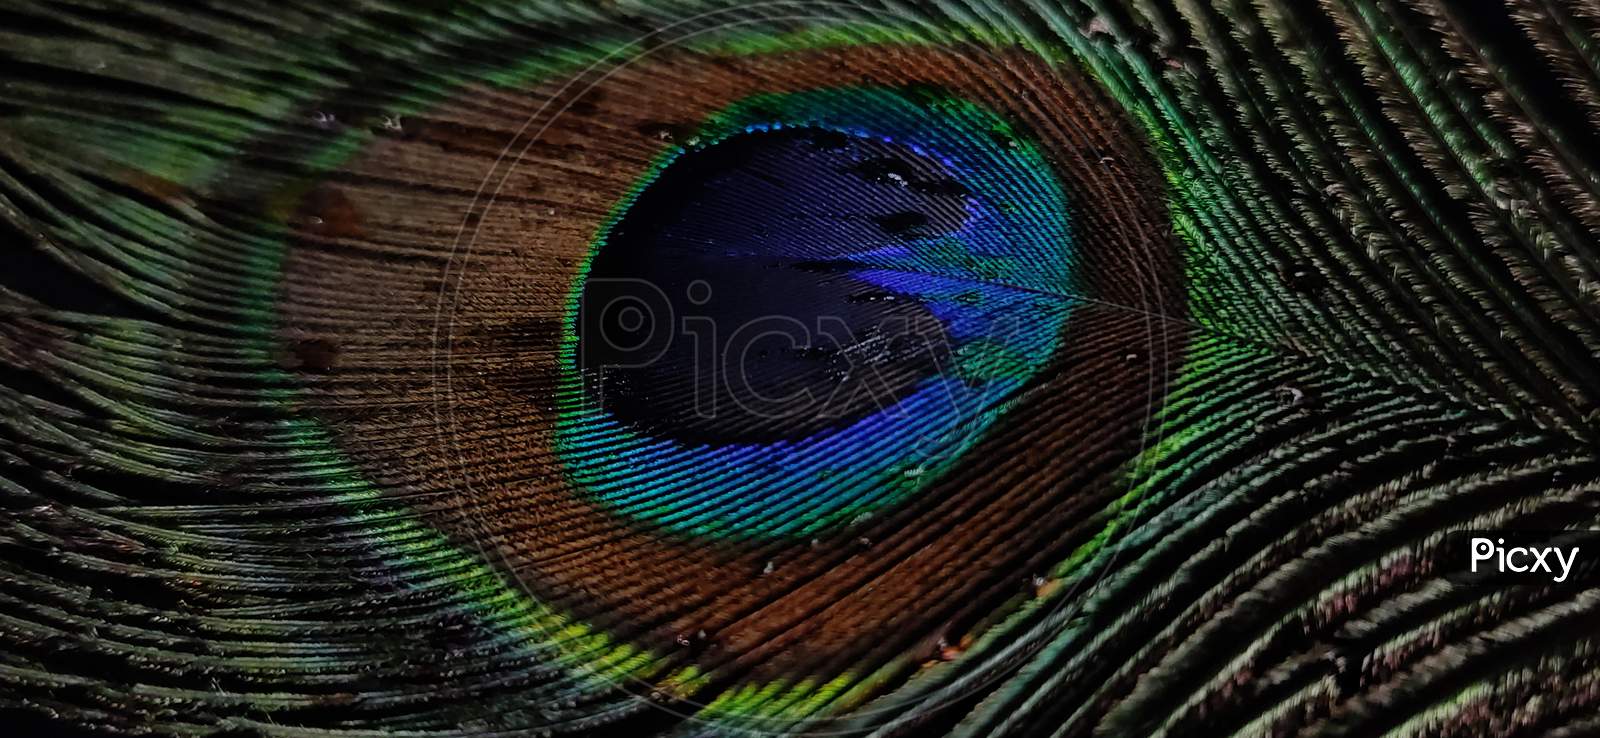 Beautiful feather of peacock.